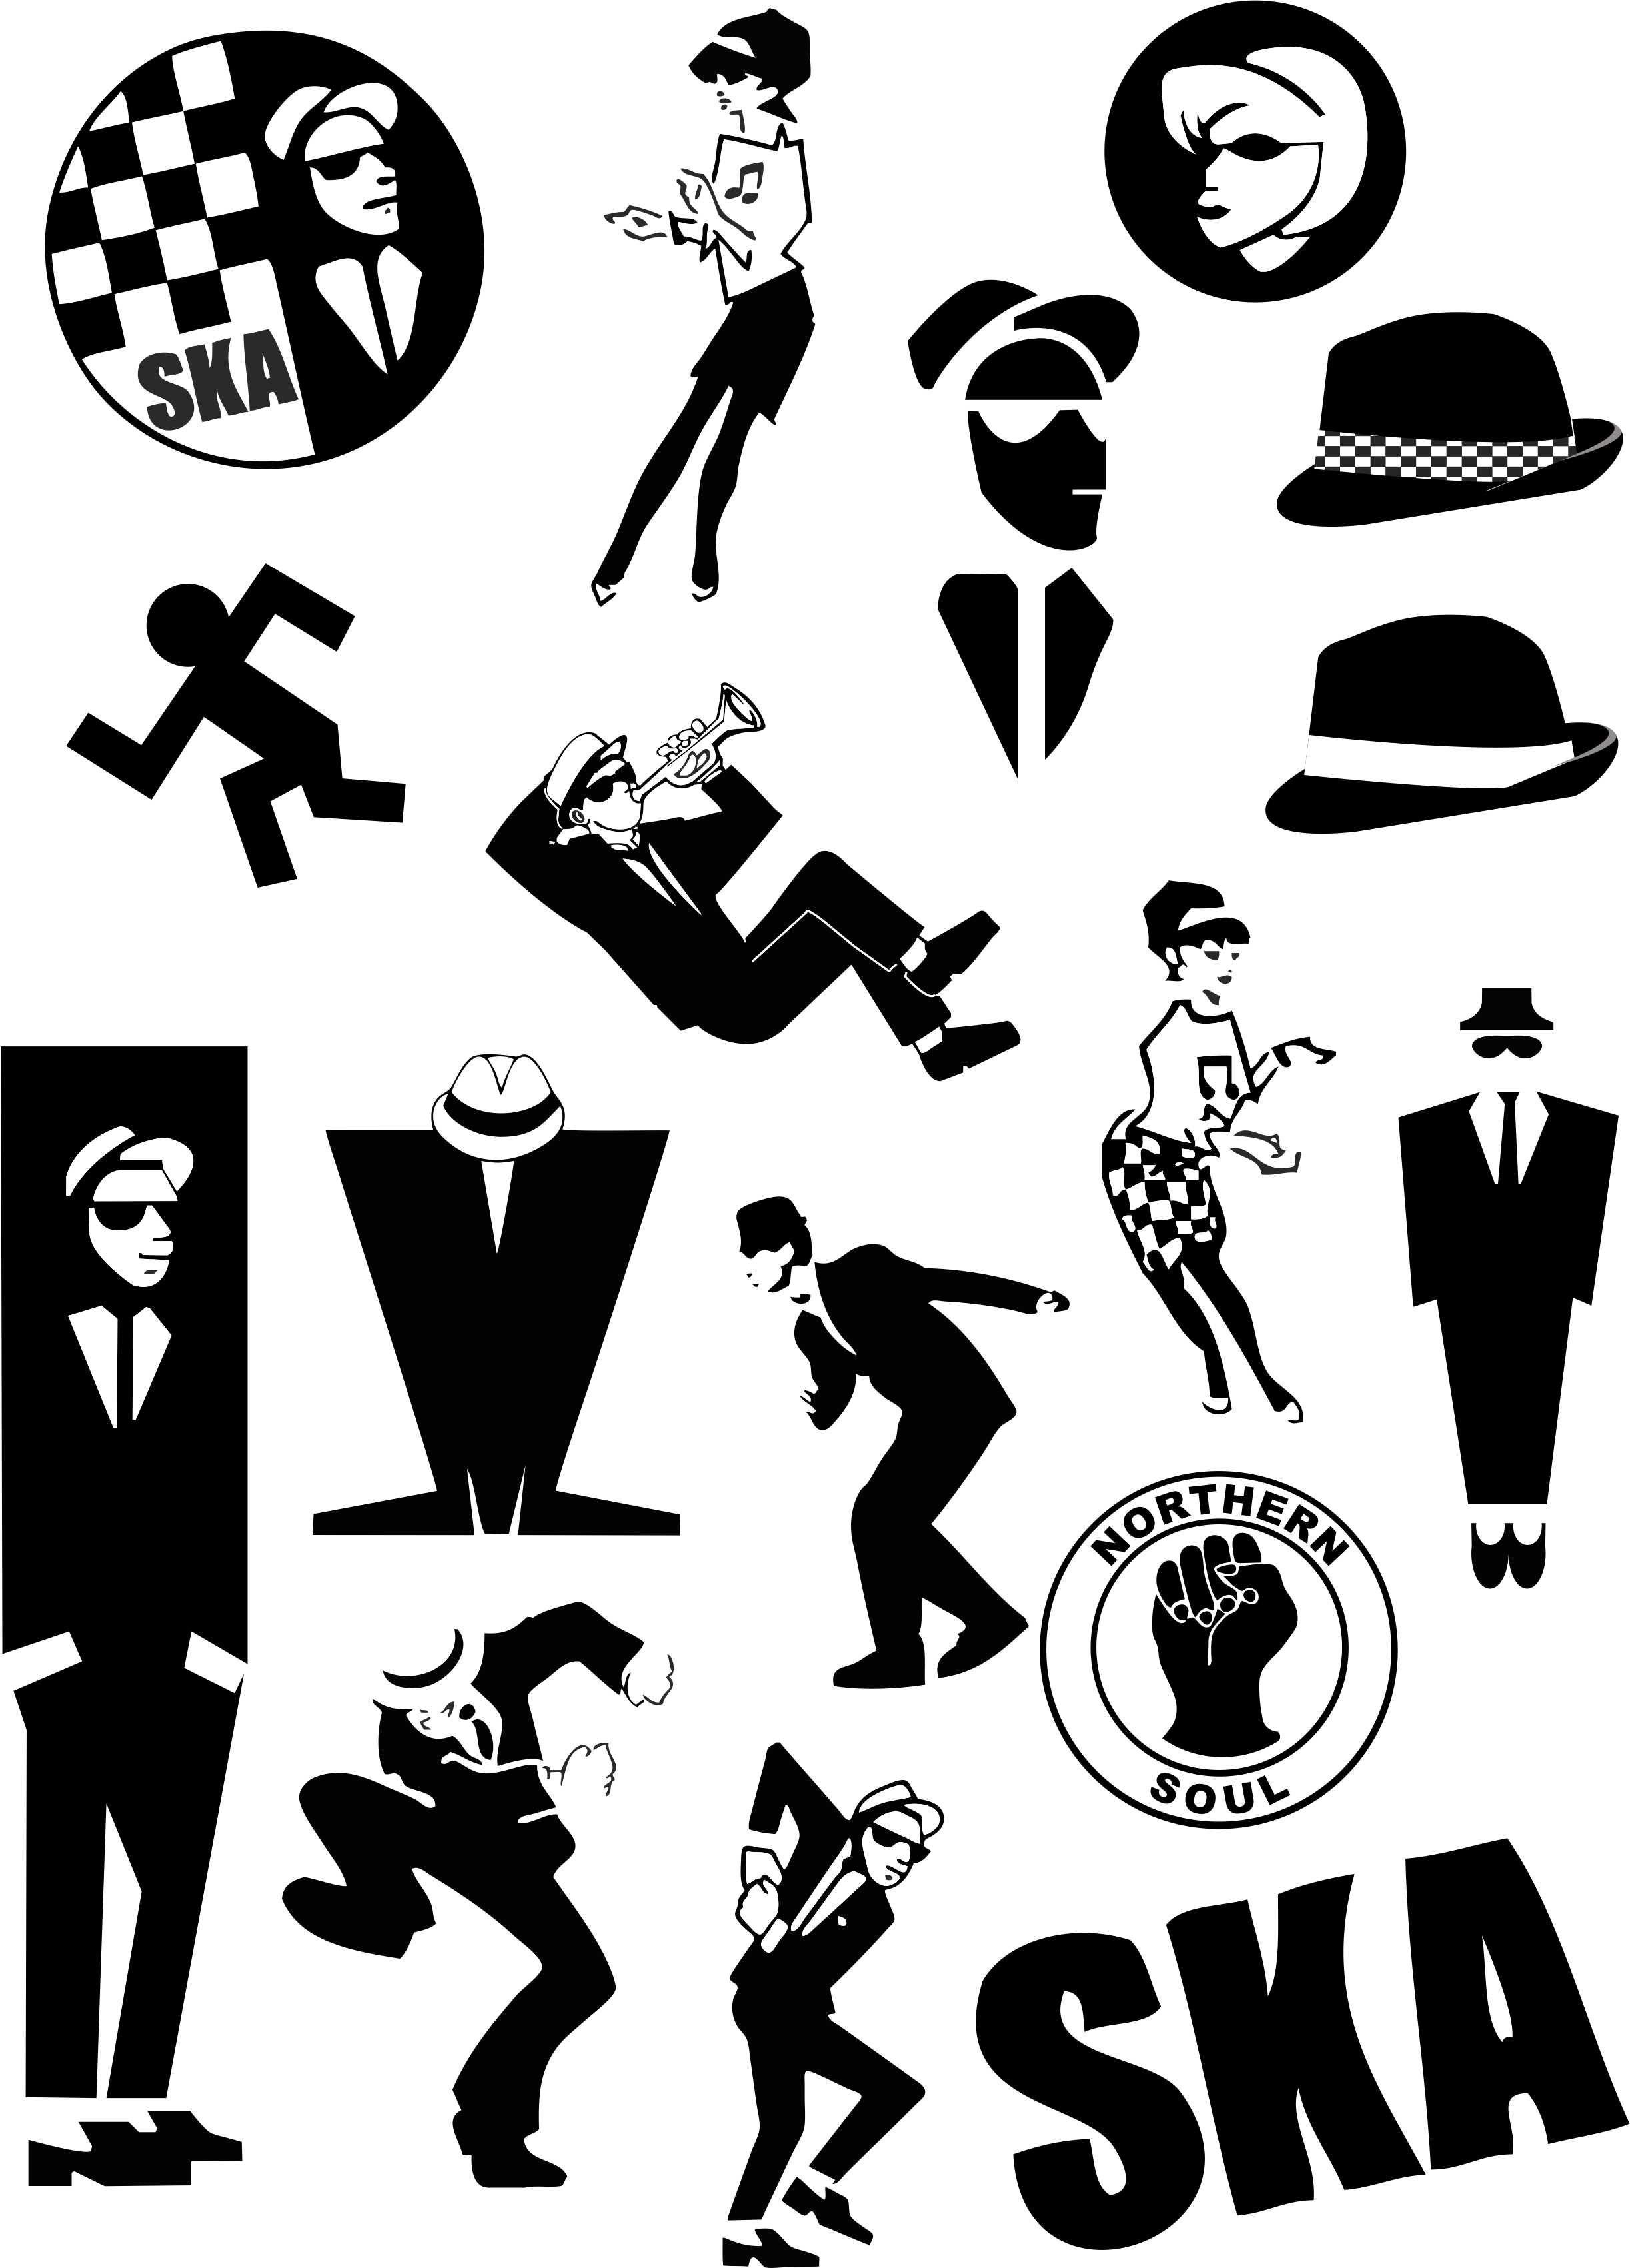 Ska founded in the 50's. Ska is a combined musical element